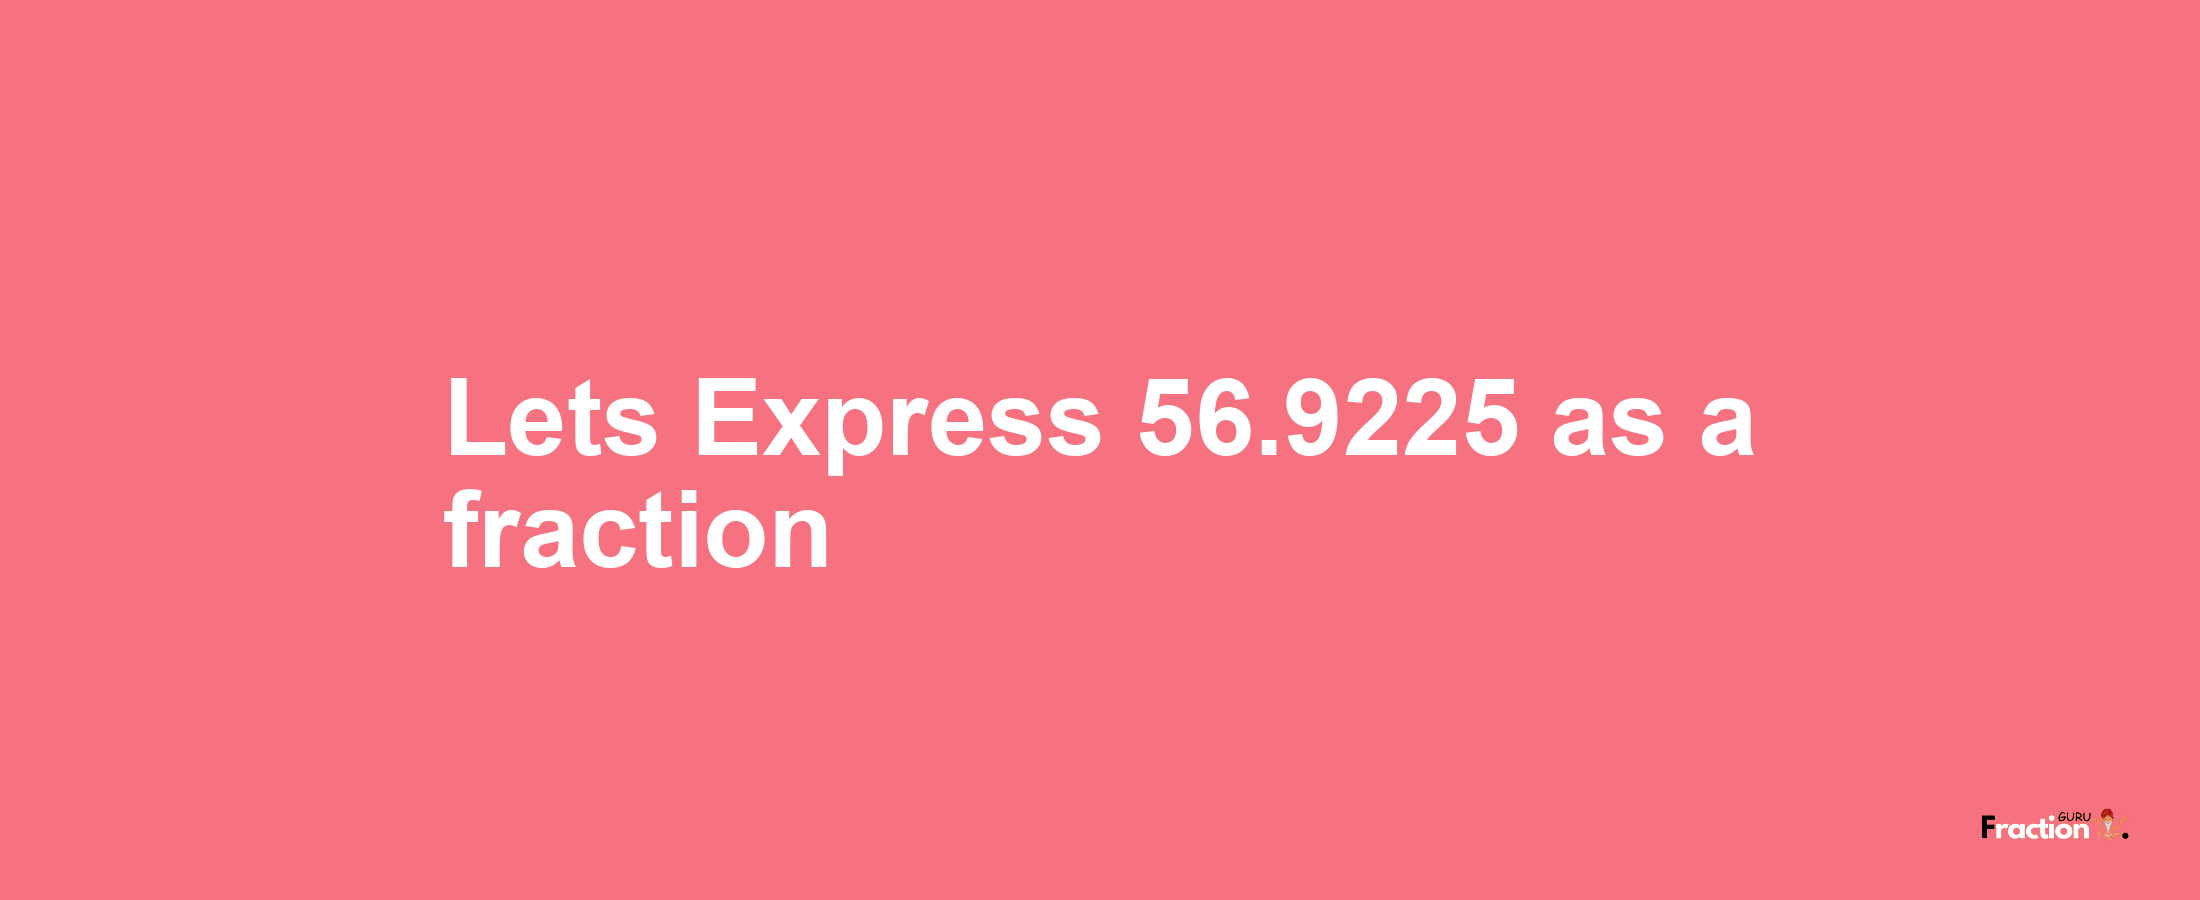 Lets Express 56.9225 as afraction